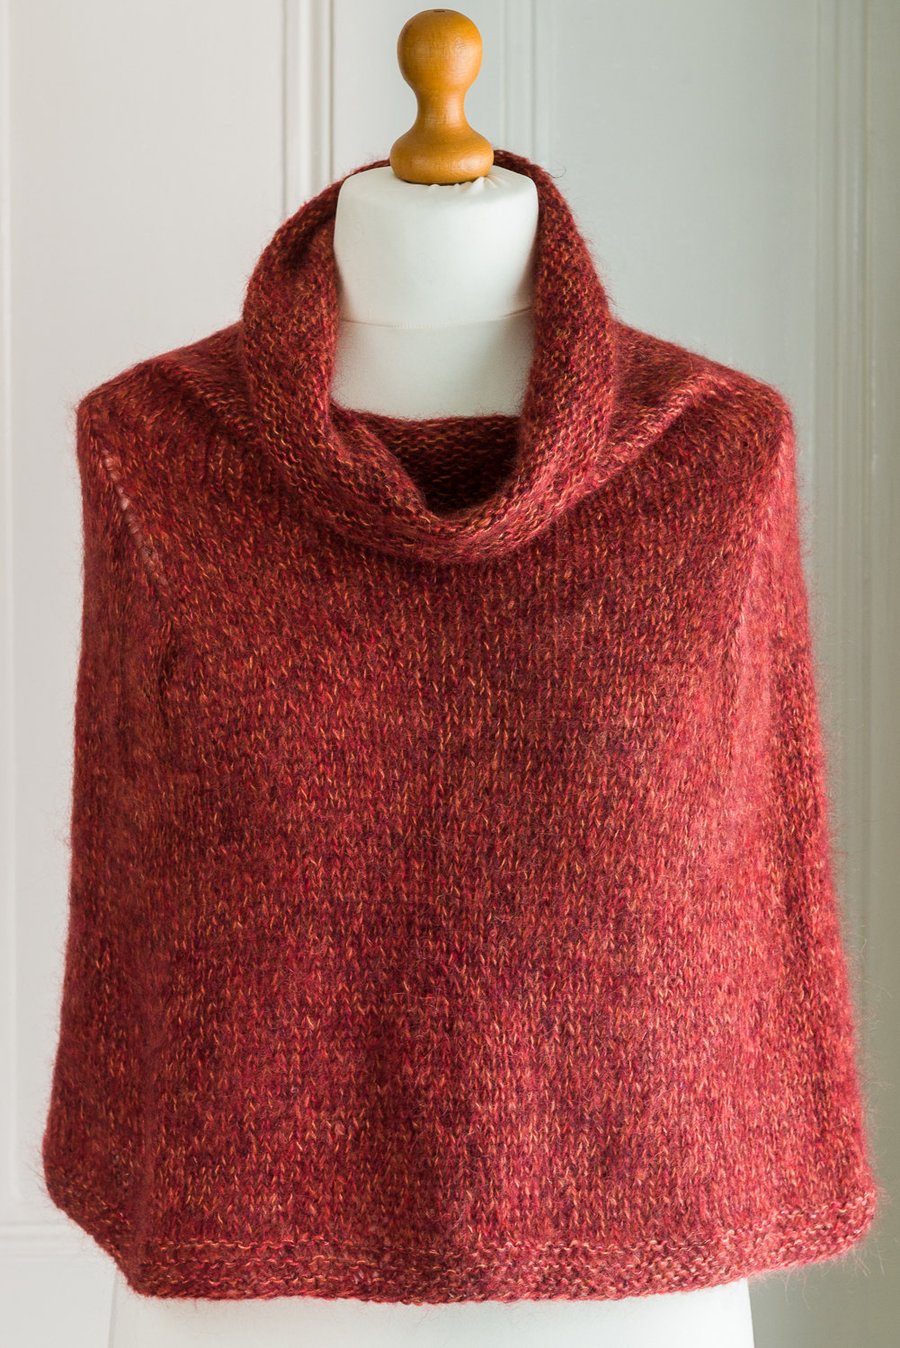 This cape is a super soft and warm capelet or poncho, hand knit and seamless